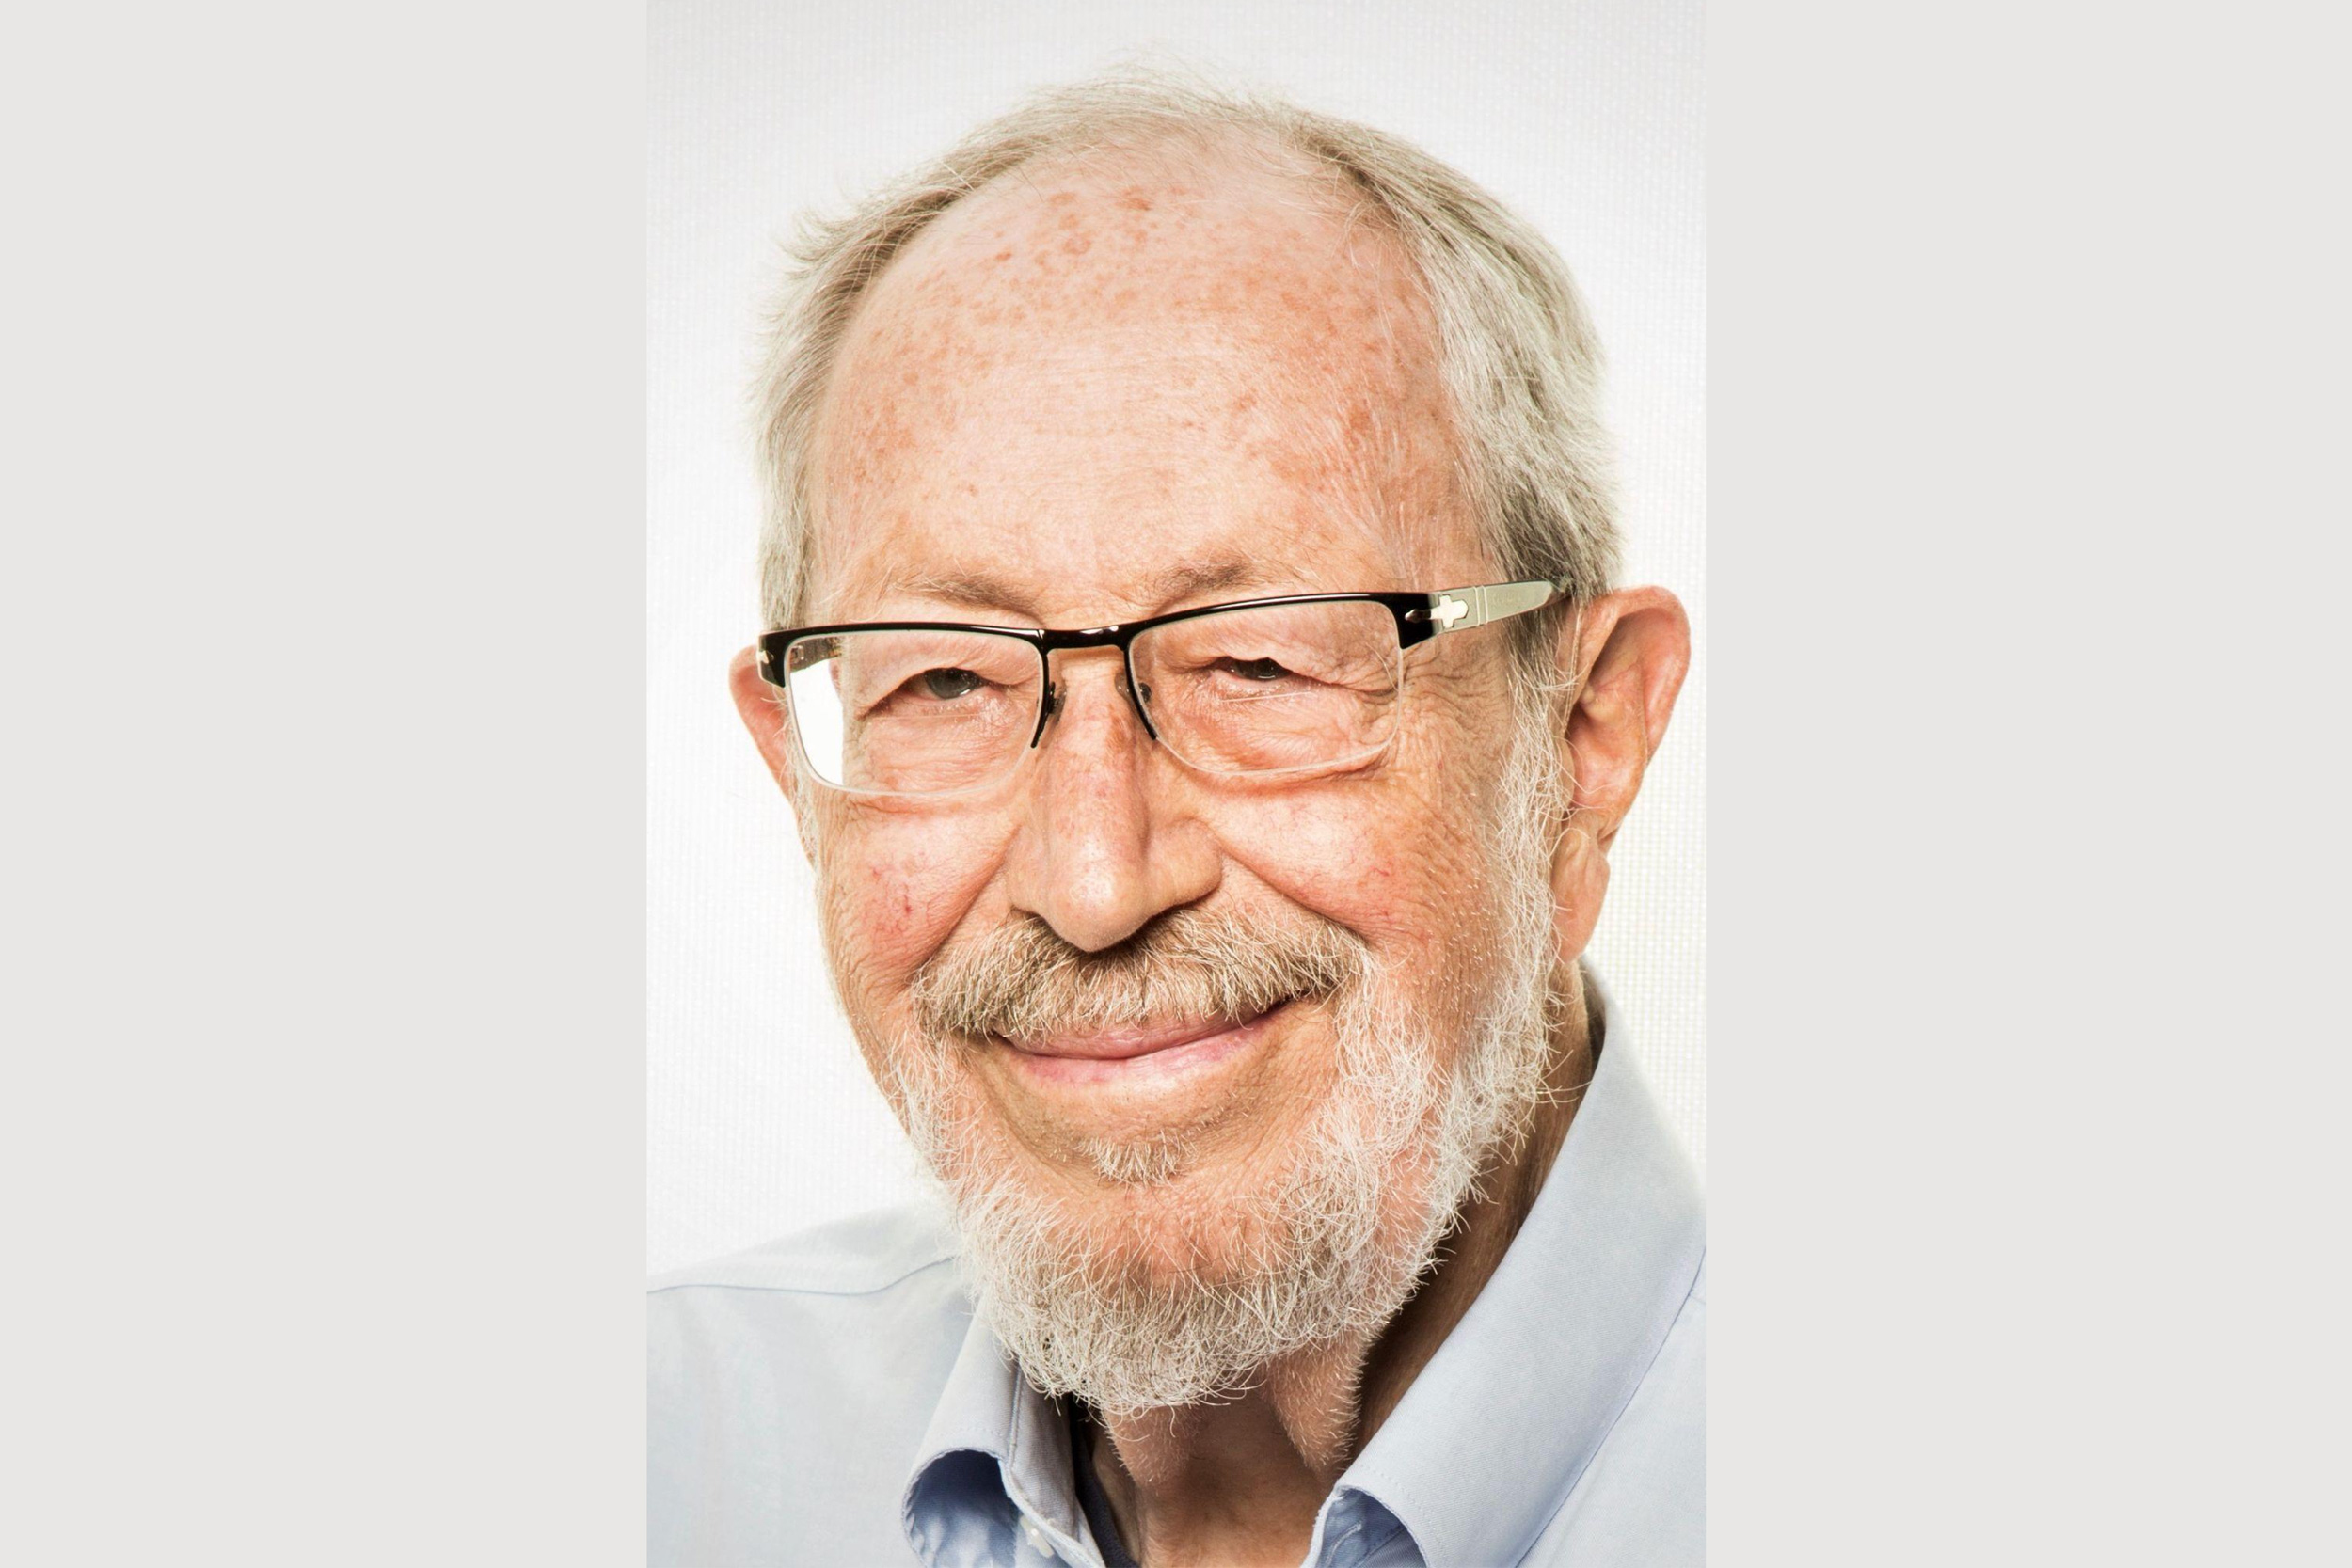 Edgar Schein, who was the Society of Sloan Fellows professor of management emeritus at MIT Sloan, joined the school in 1956, when it was still known as the MIT School of Industrial Management.